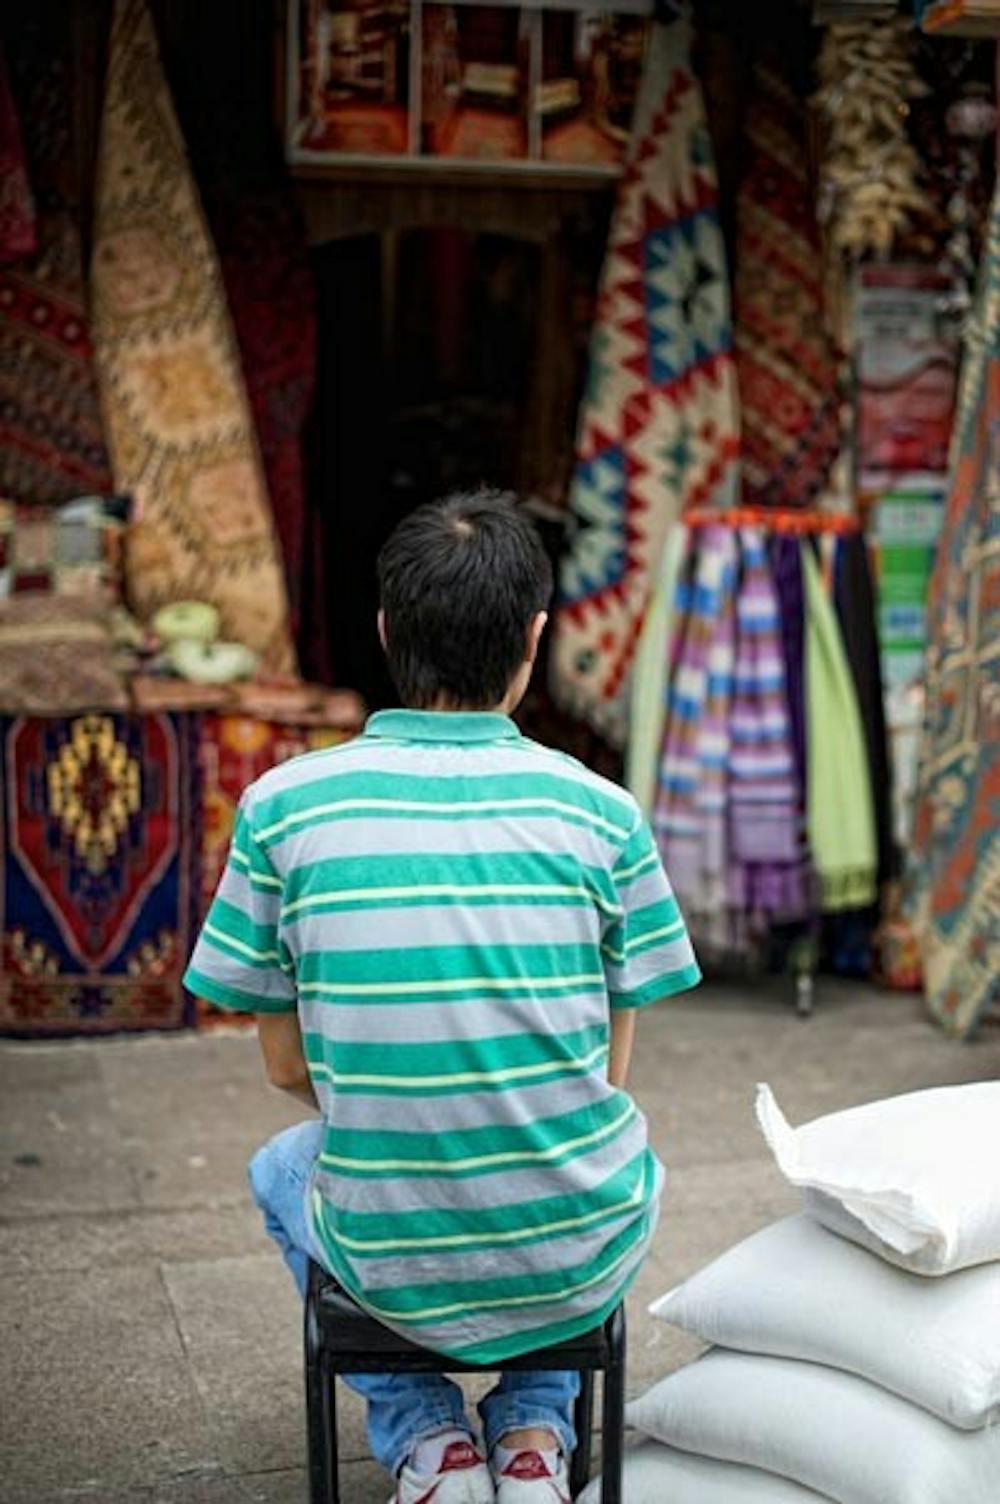 GLOBAL LOANS: A young boy waits for customers in front of his carpet stall at an outdoor bazaar in Selcuk, Turkey. Microloan organizations such as Kiva target similar individuals and small businesses to offer small-scale loans to. (Photo by Michael Arellano)